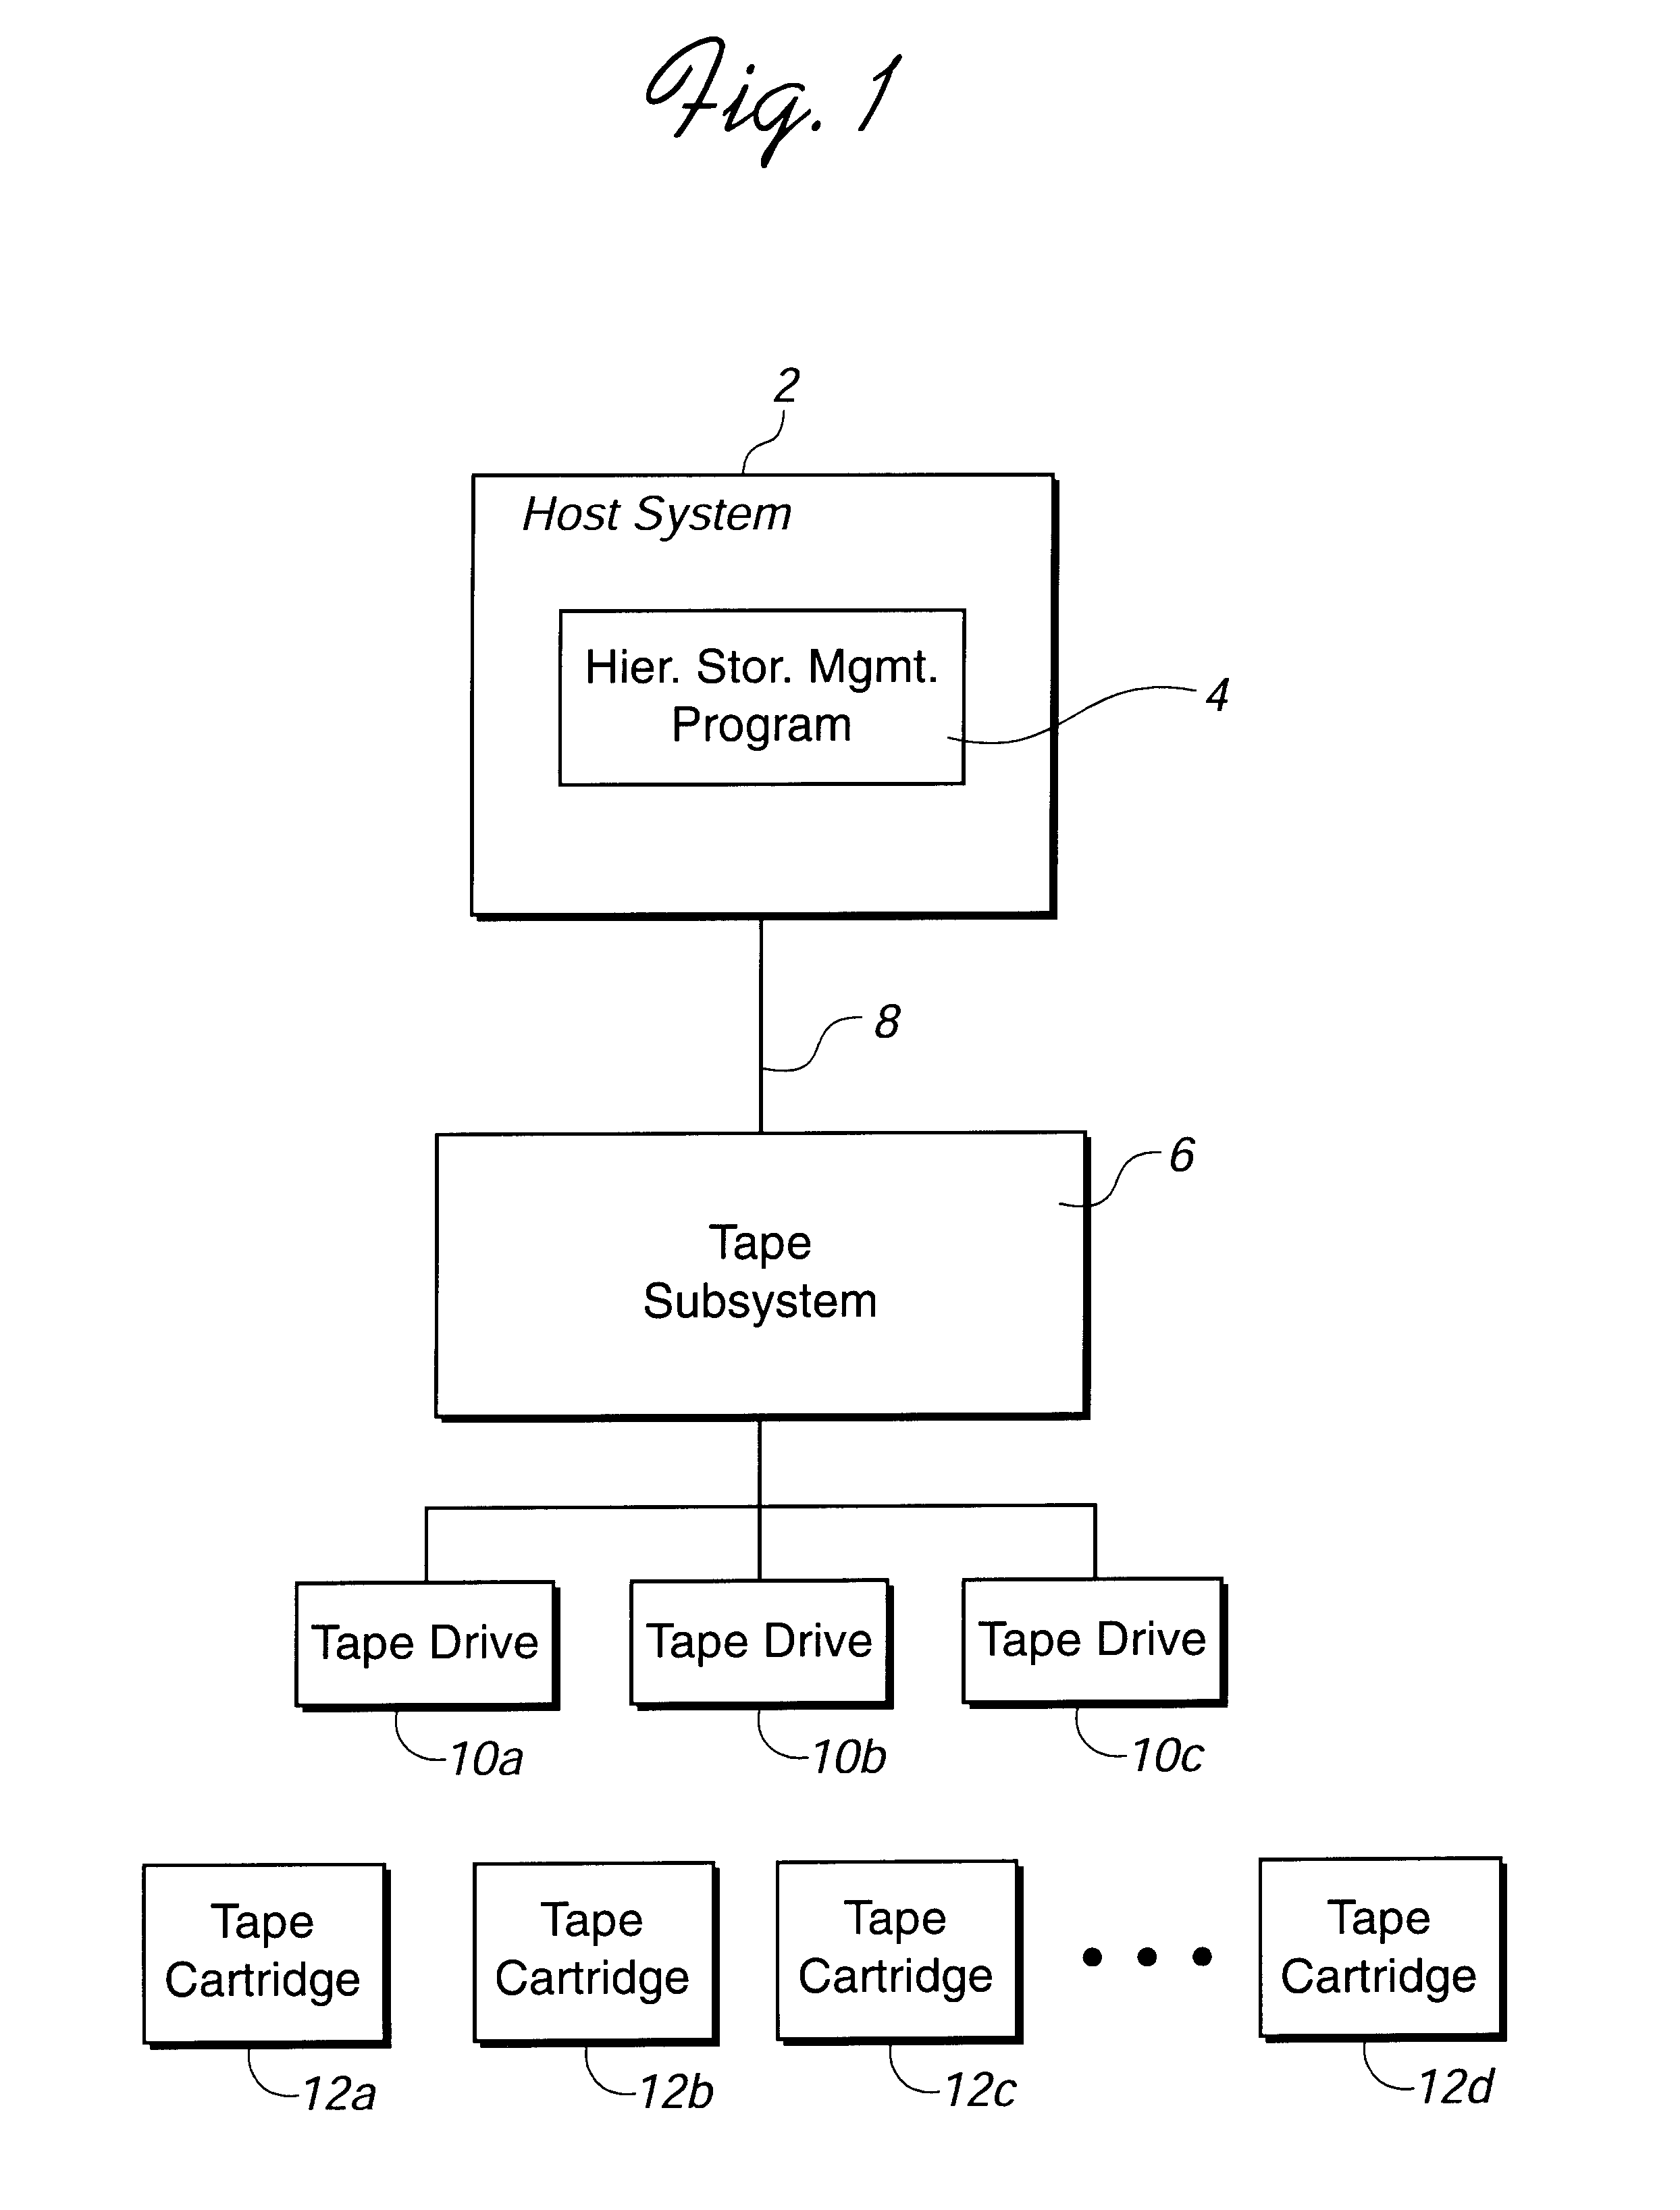 Storage management system and method for increasing capacity utilization of nonvolatile storage devices using partially filled substitute storage devices for continuing write operations